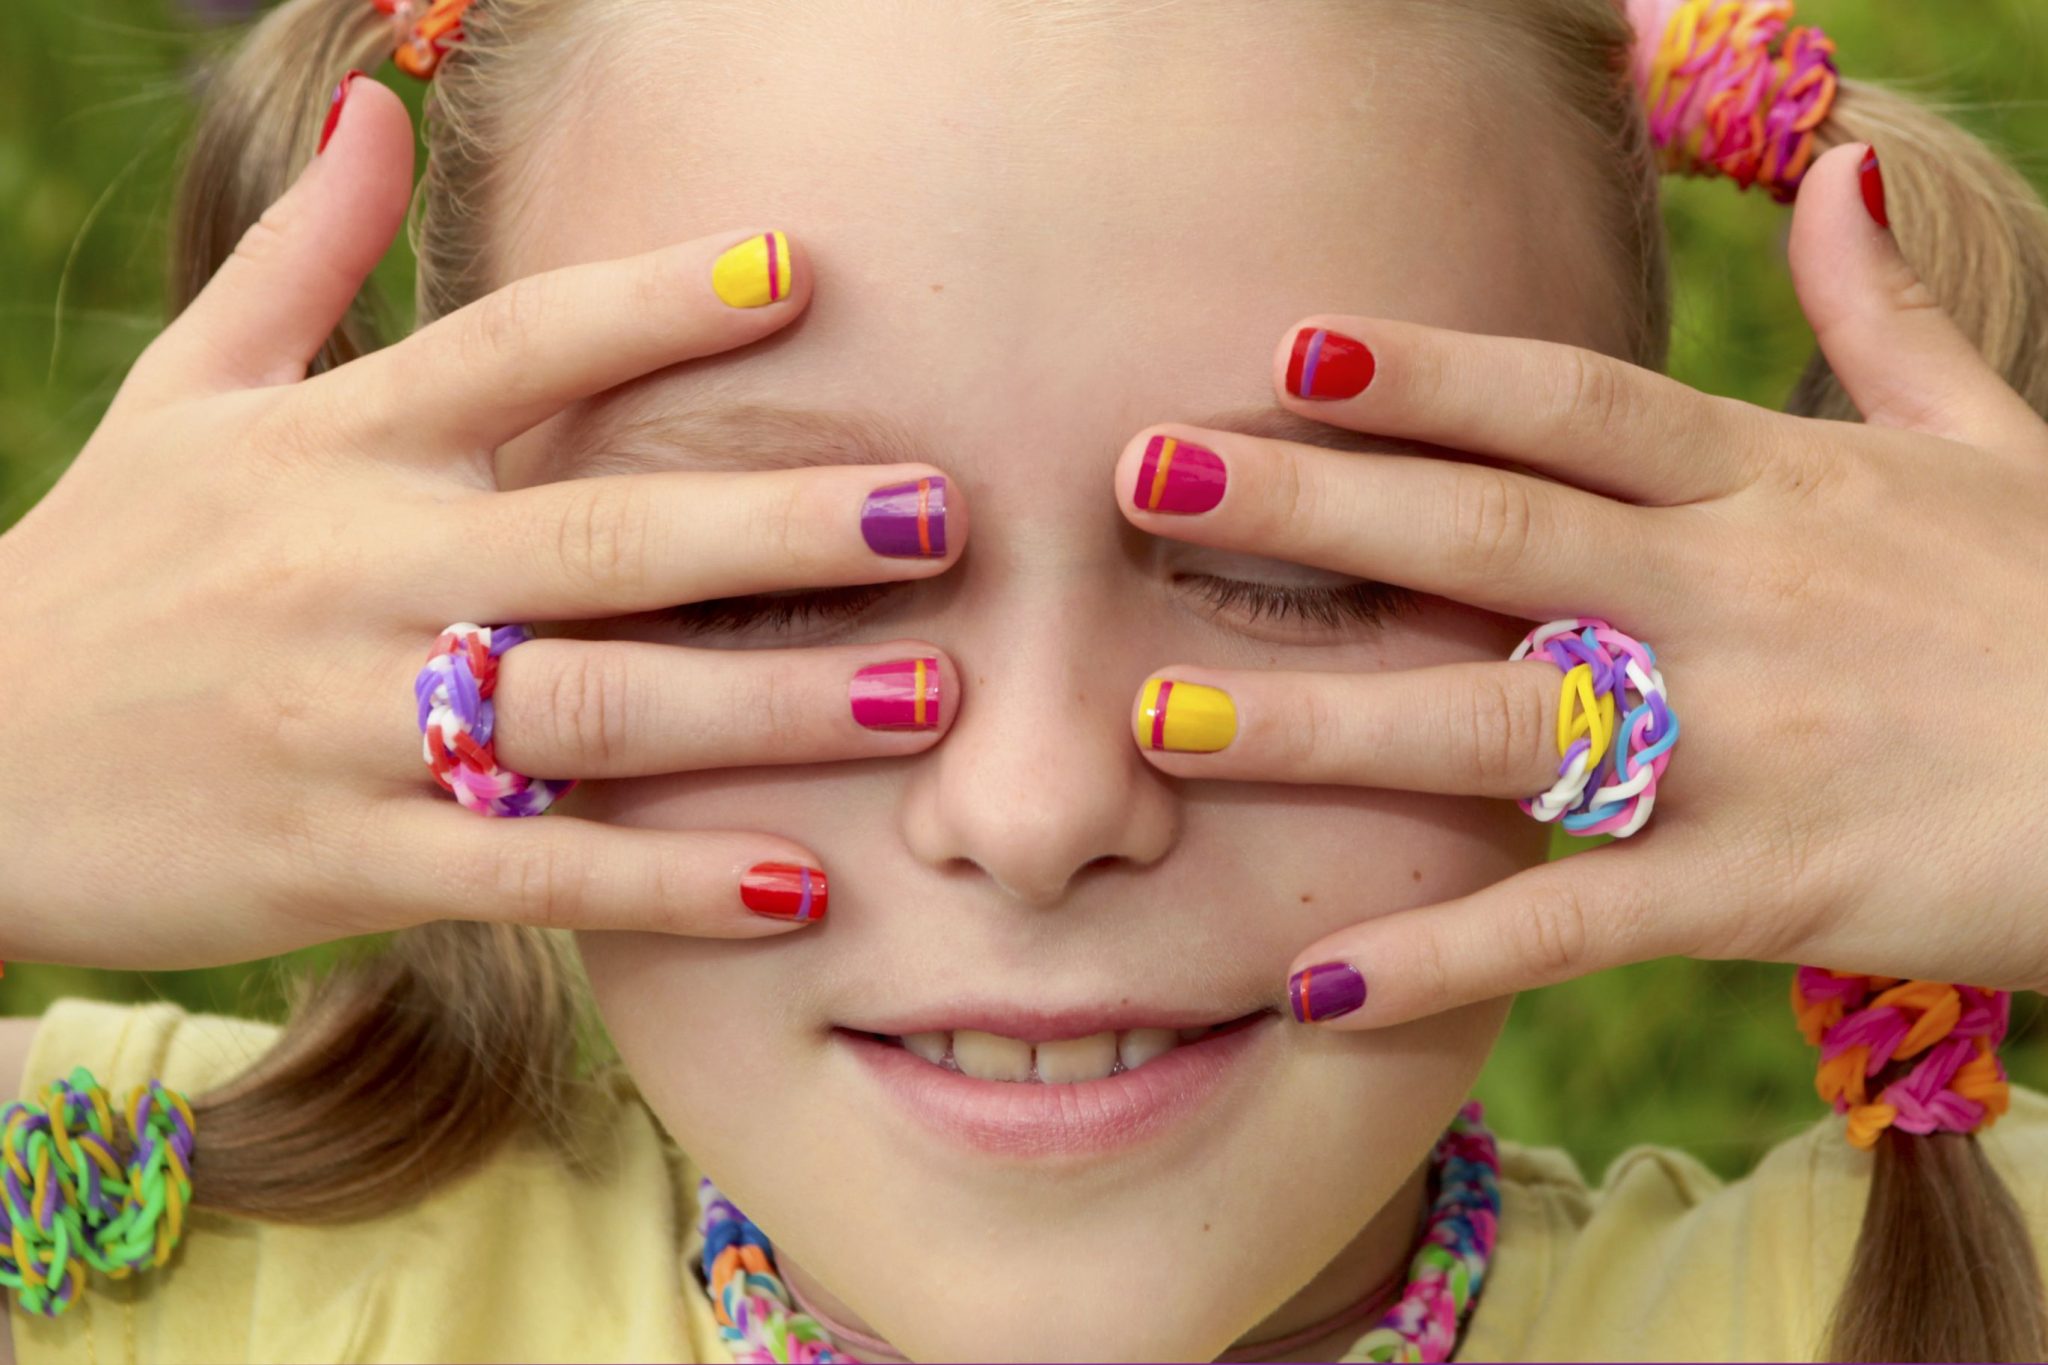 1. Kids Manicure Nail Art for Tropical Vacation - wide 7